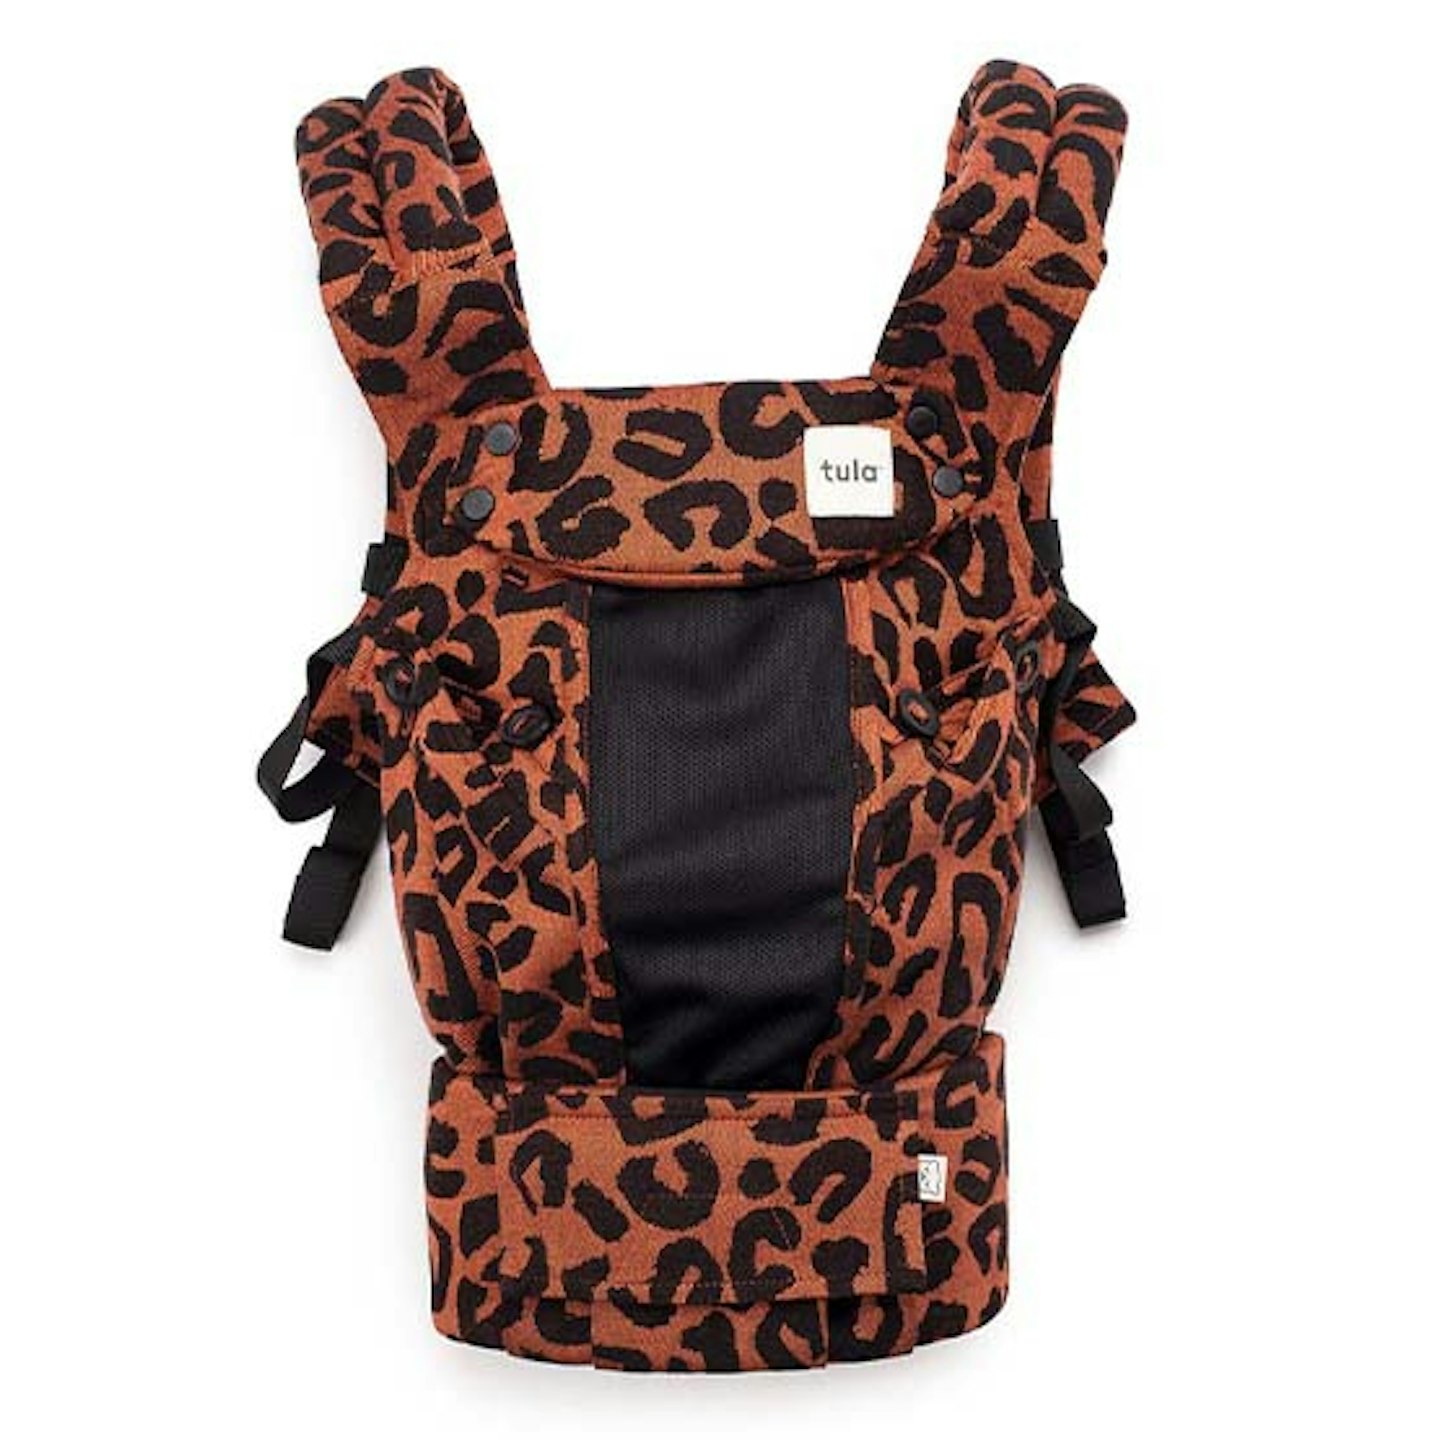 tula leopard baby carrier